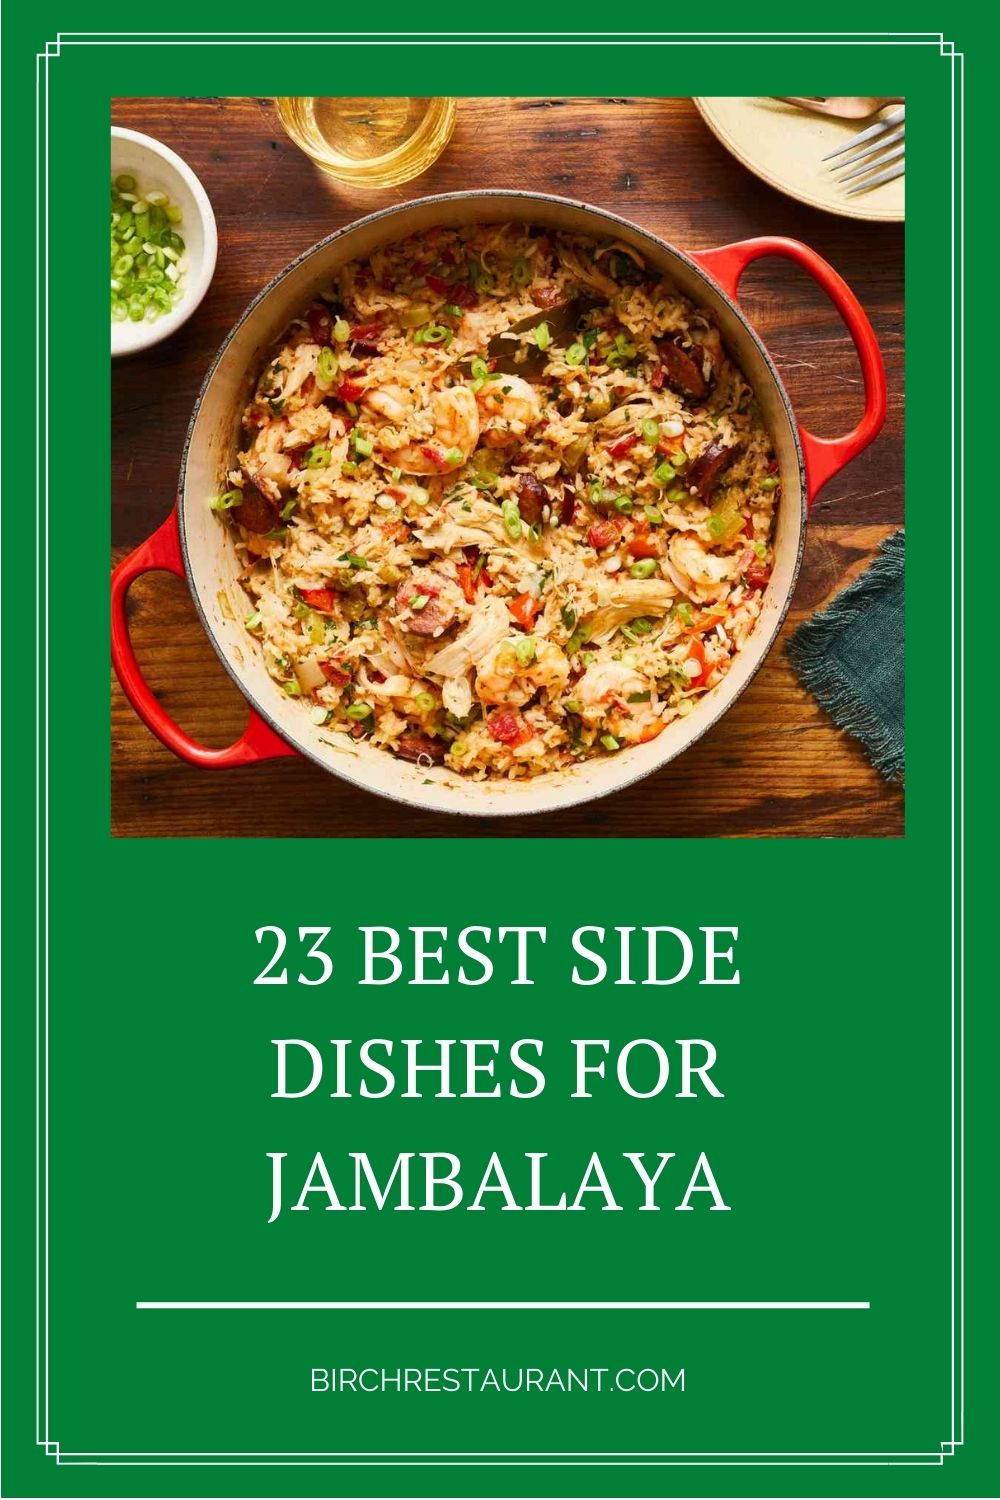 Best Side Dishes for Jambalaya